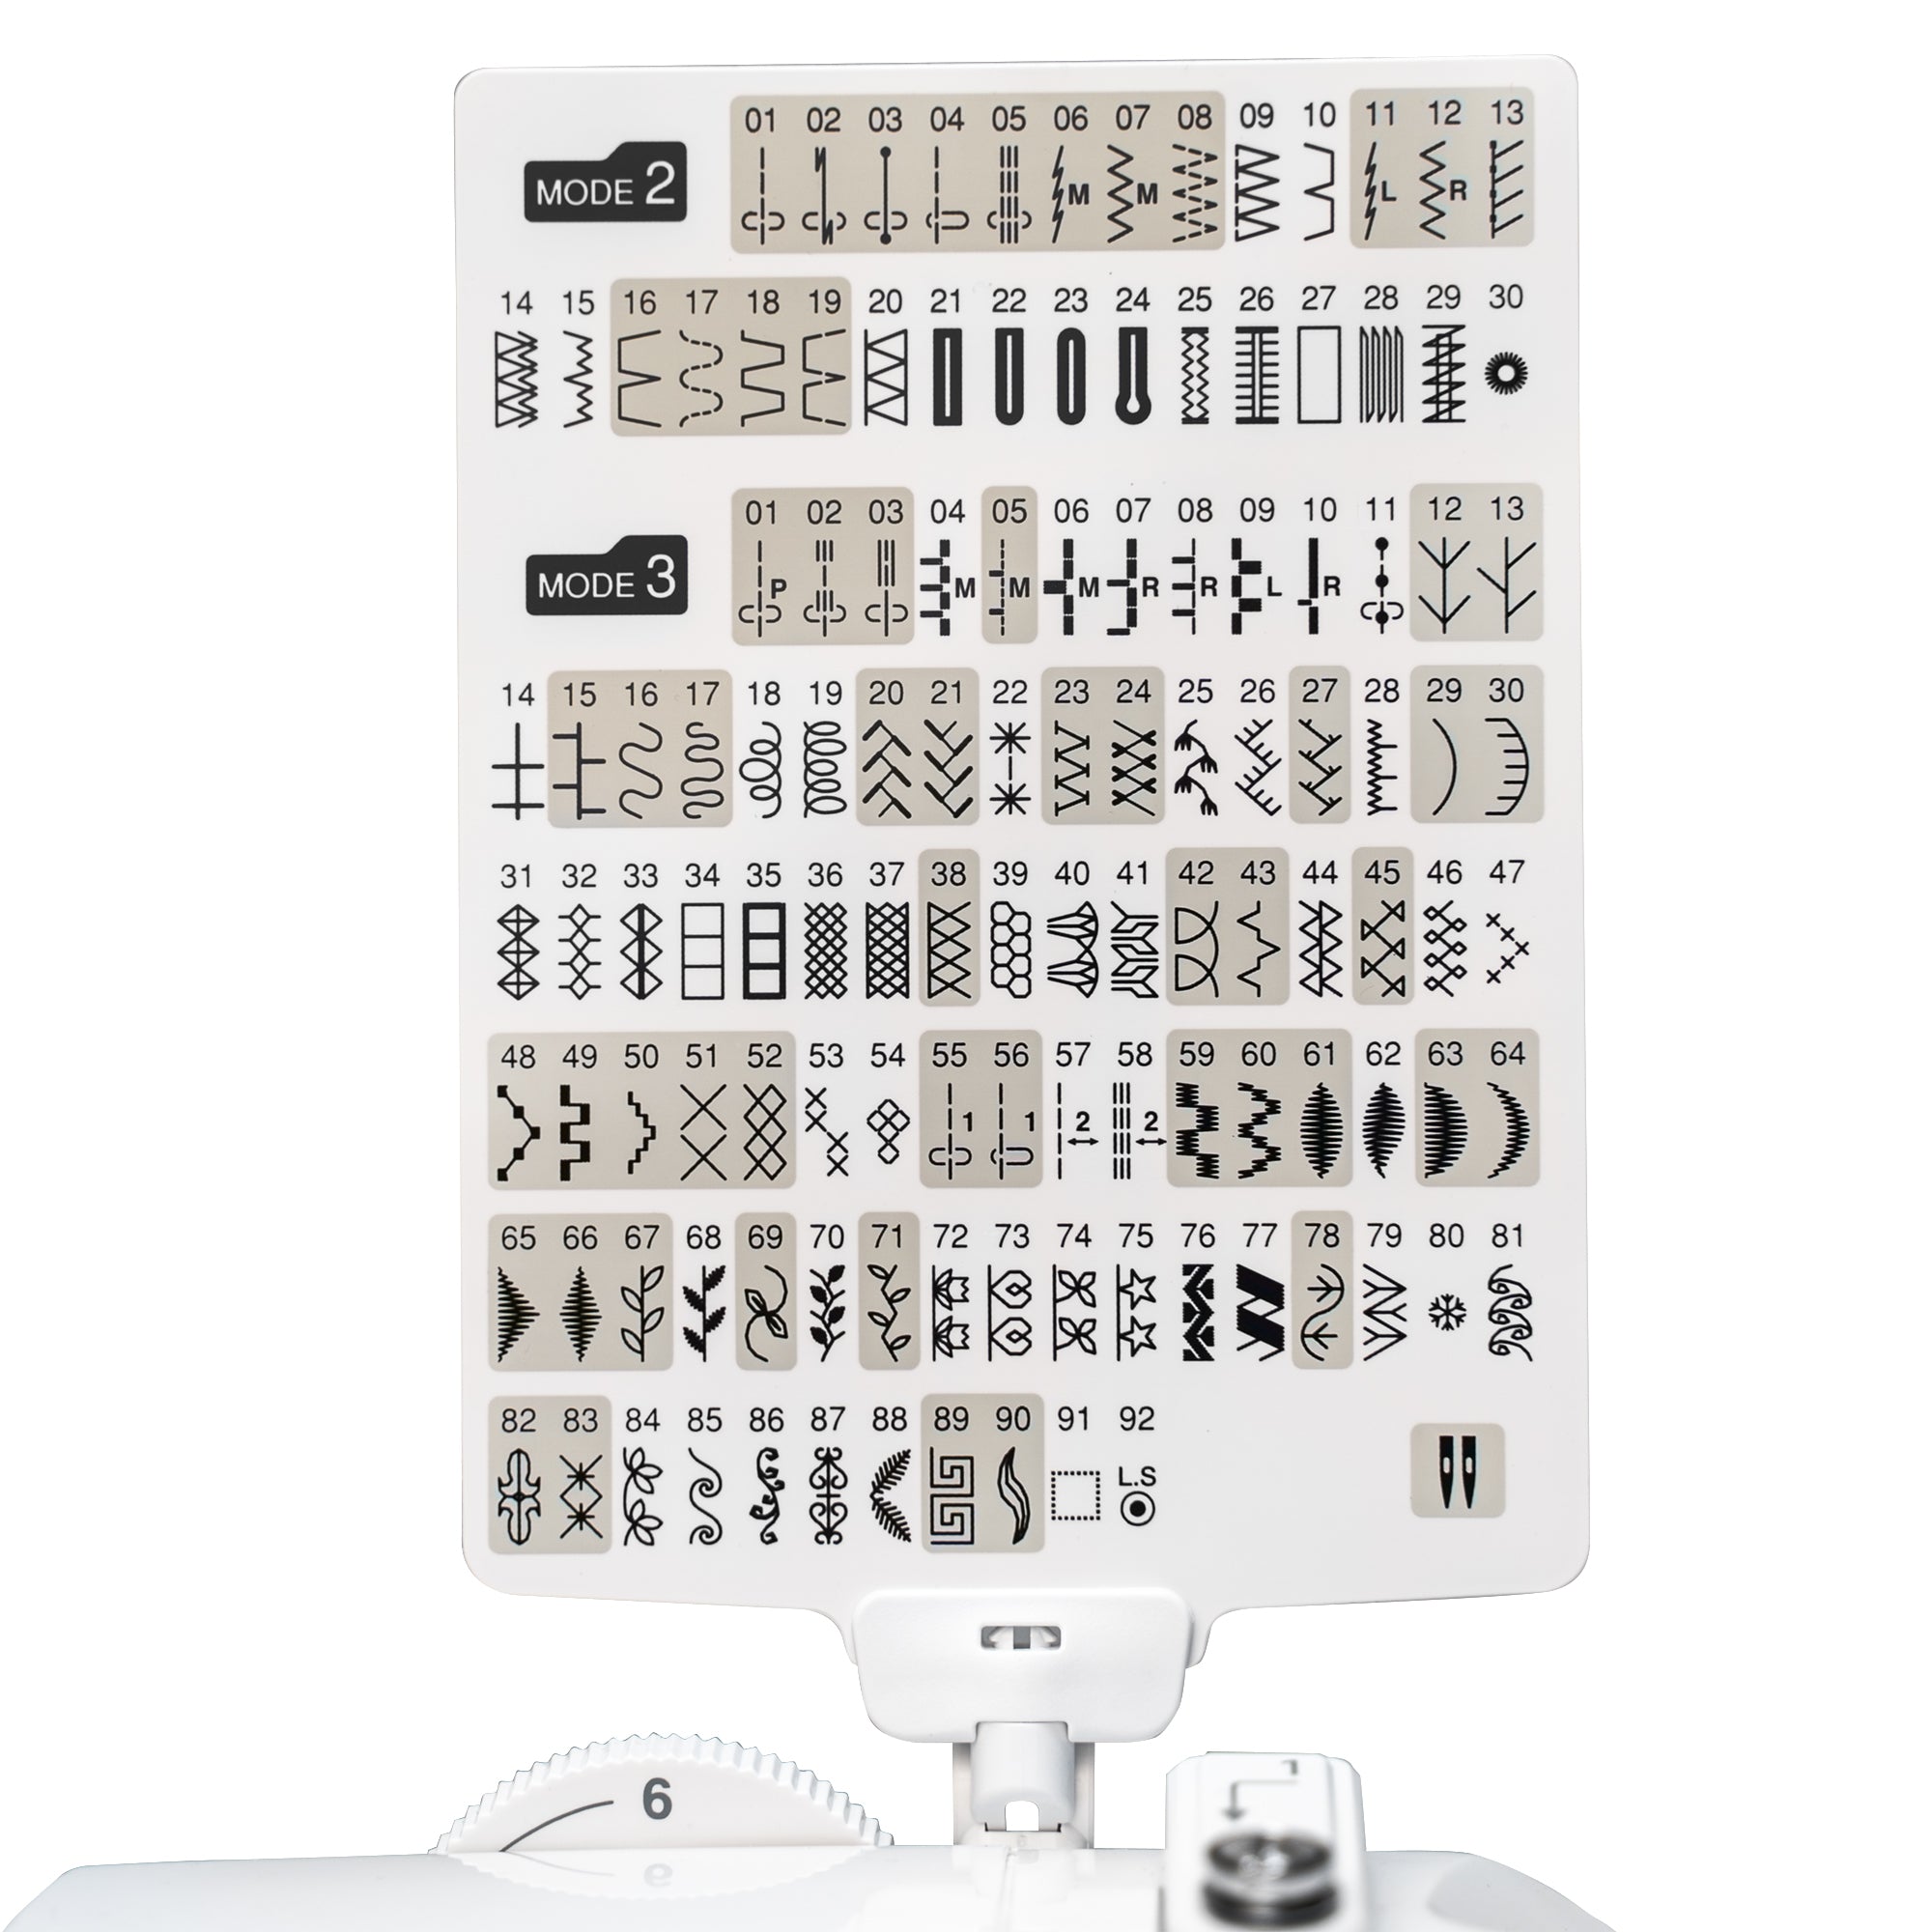 image displaying the stitch selections available with the Janome 4120QDC-G Sewing and Quilting Machine